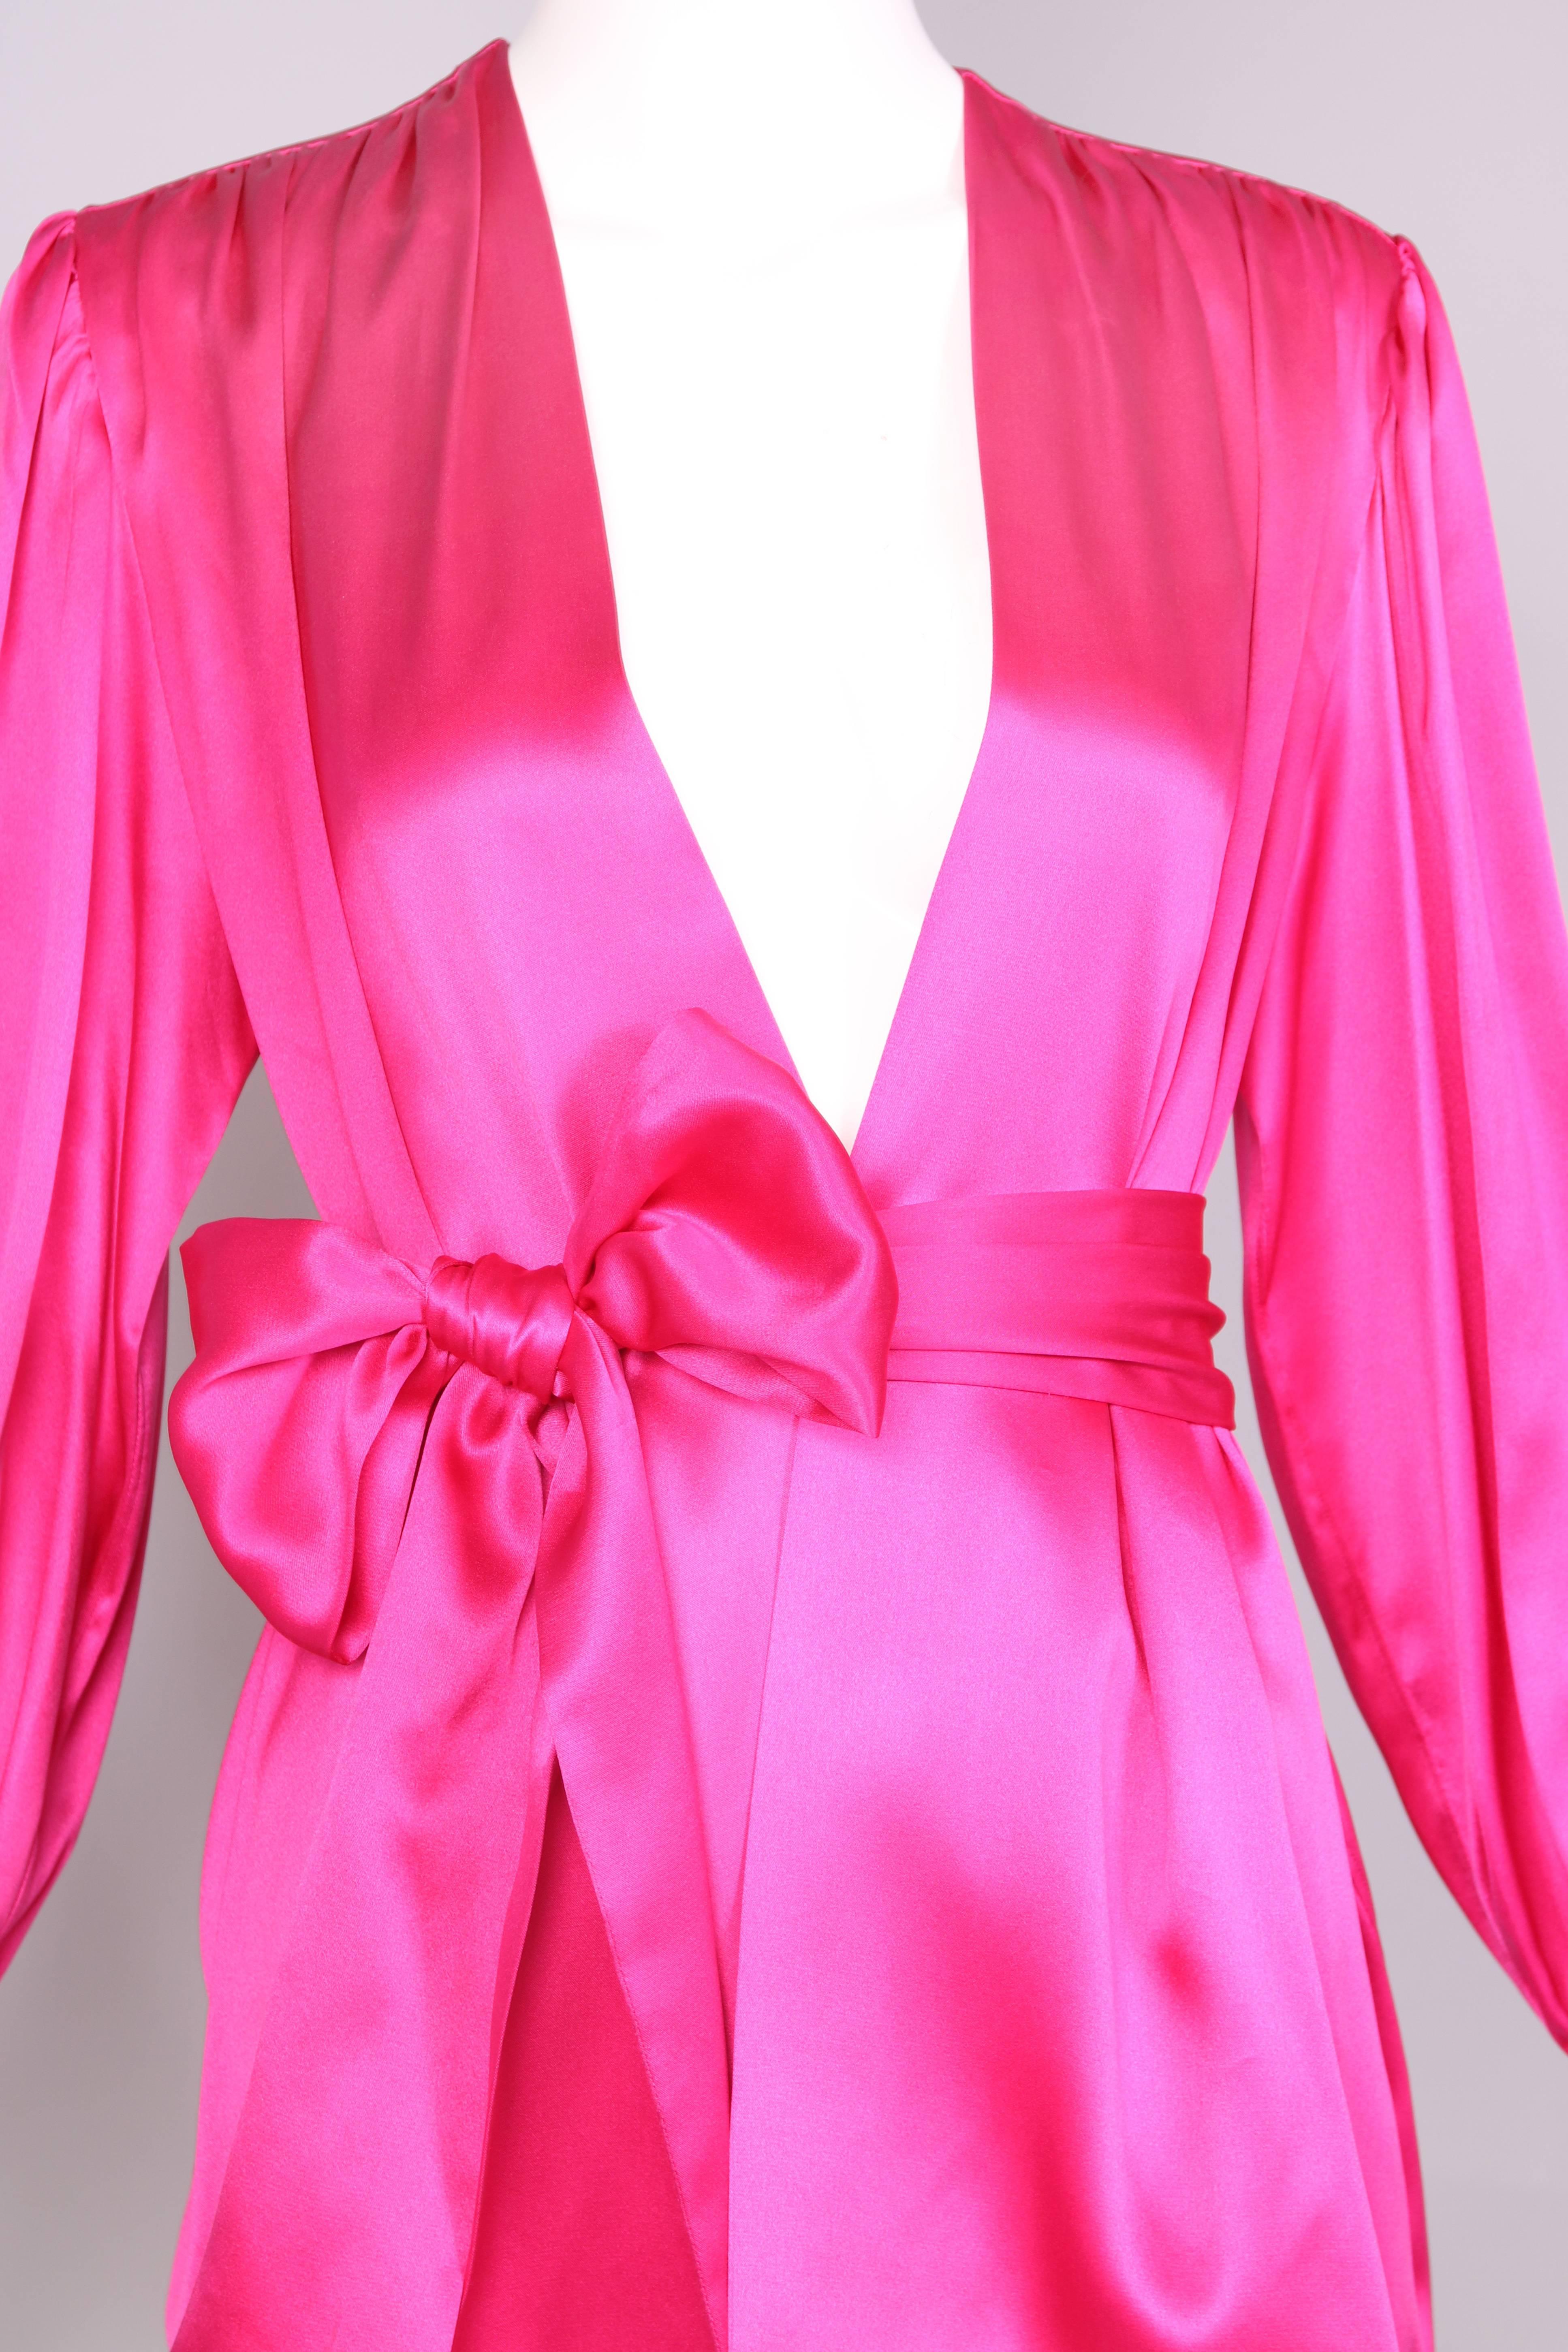 hot pink blouse